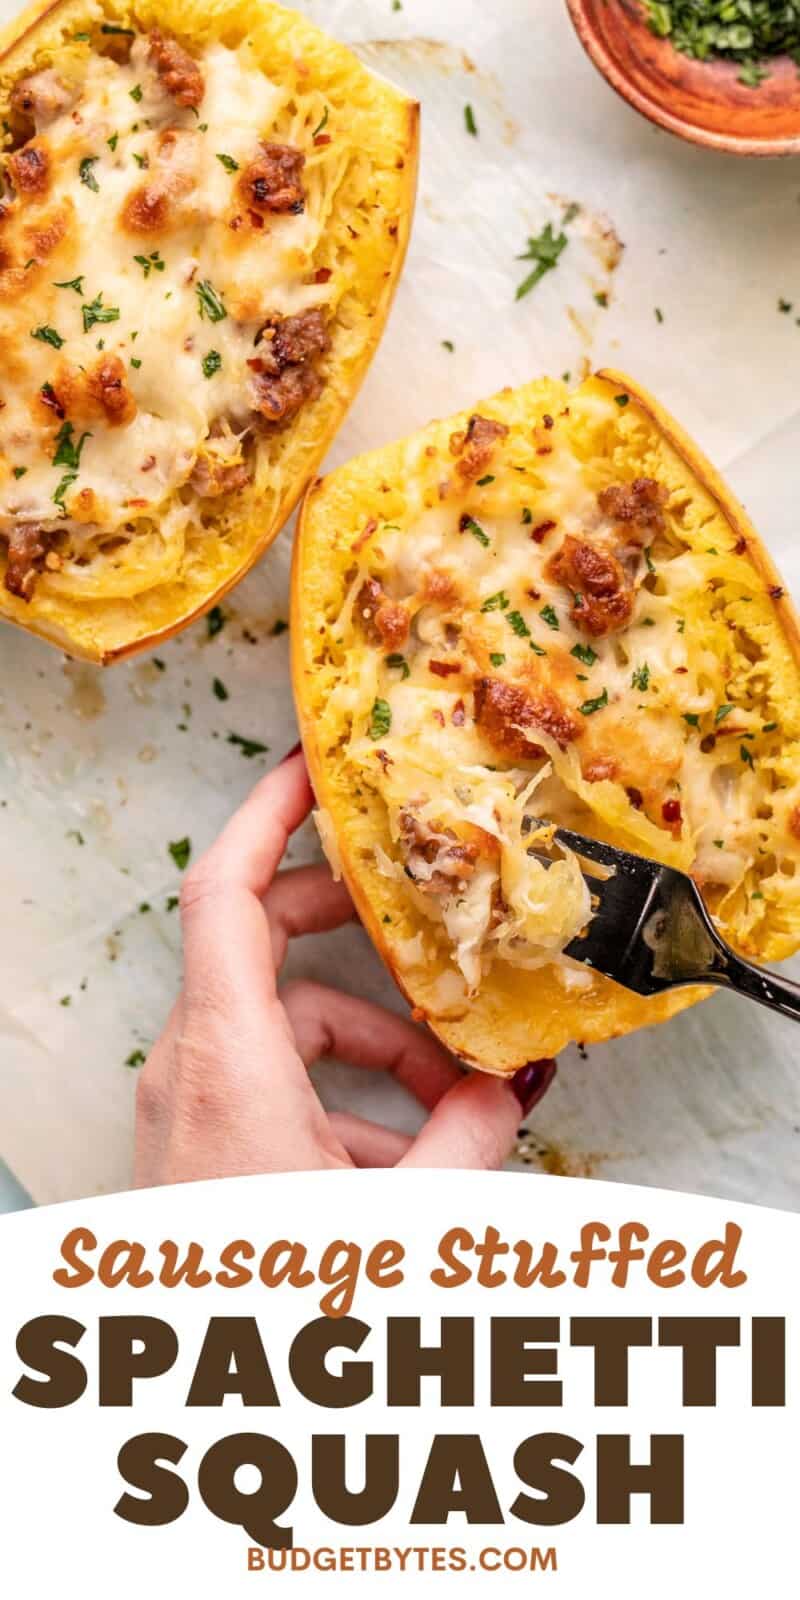 Overhead shot of a hand touching sausage stuffed spaghetti squash with a black fork in it.